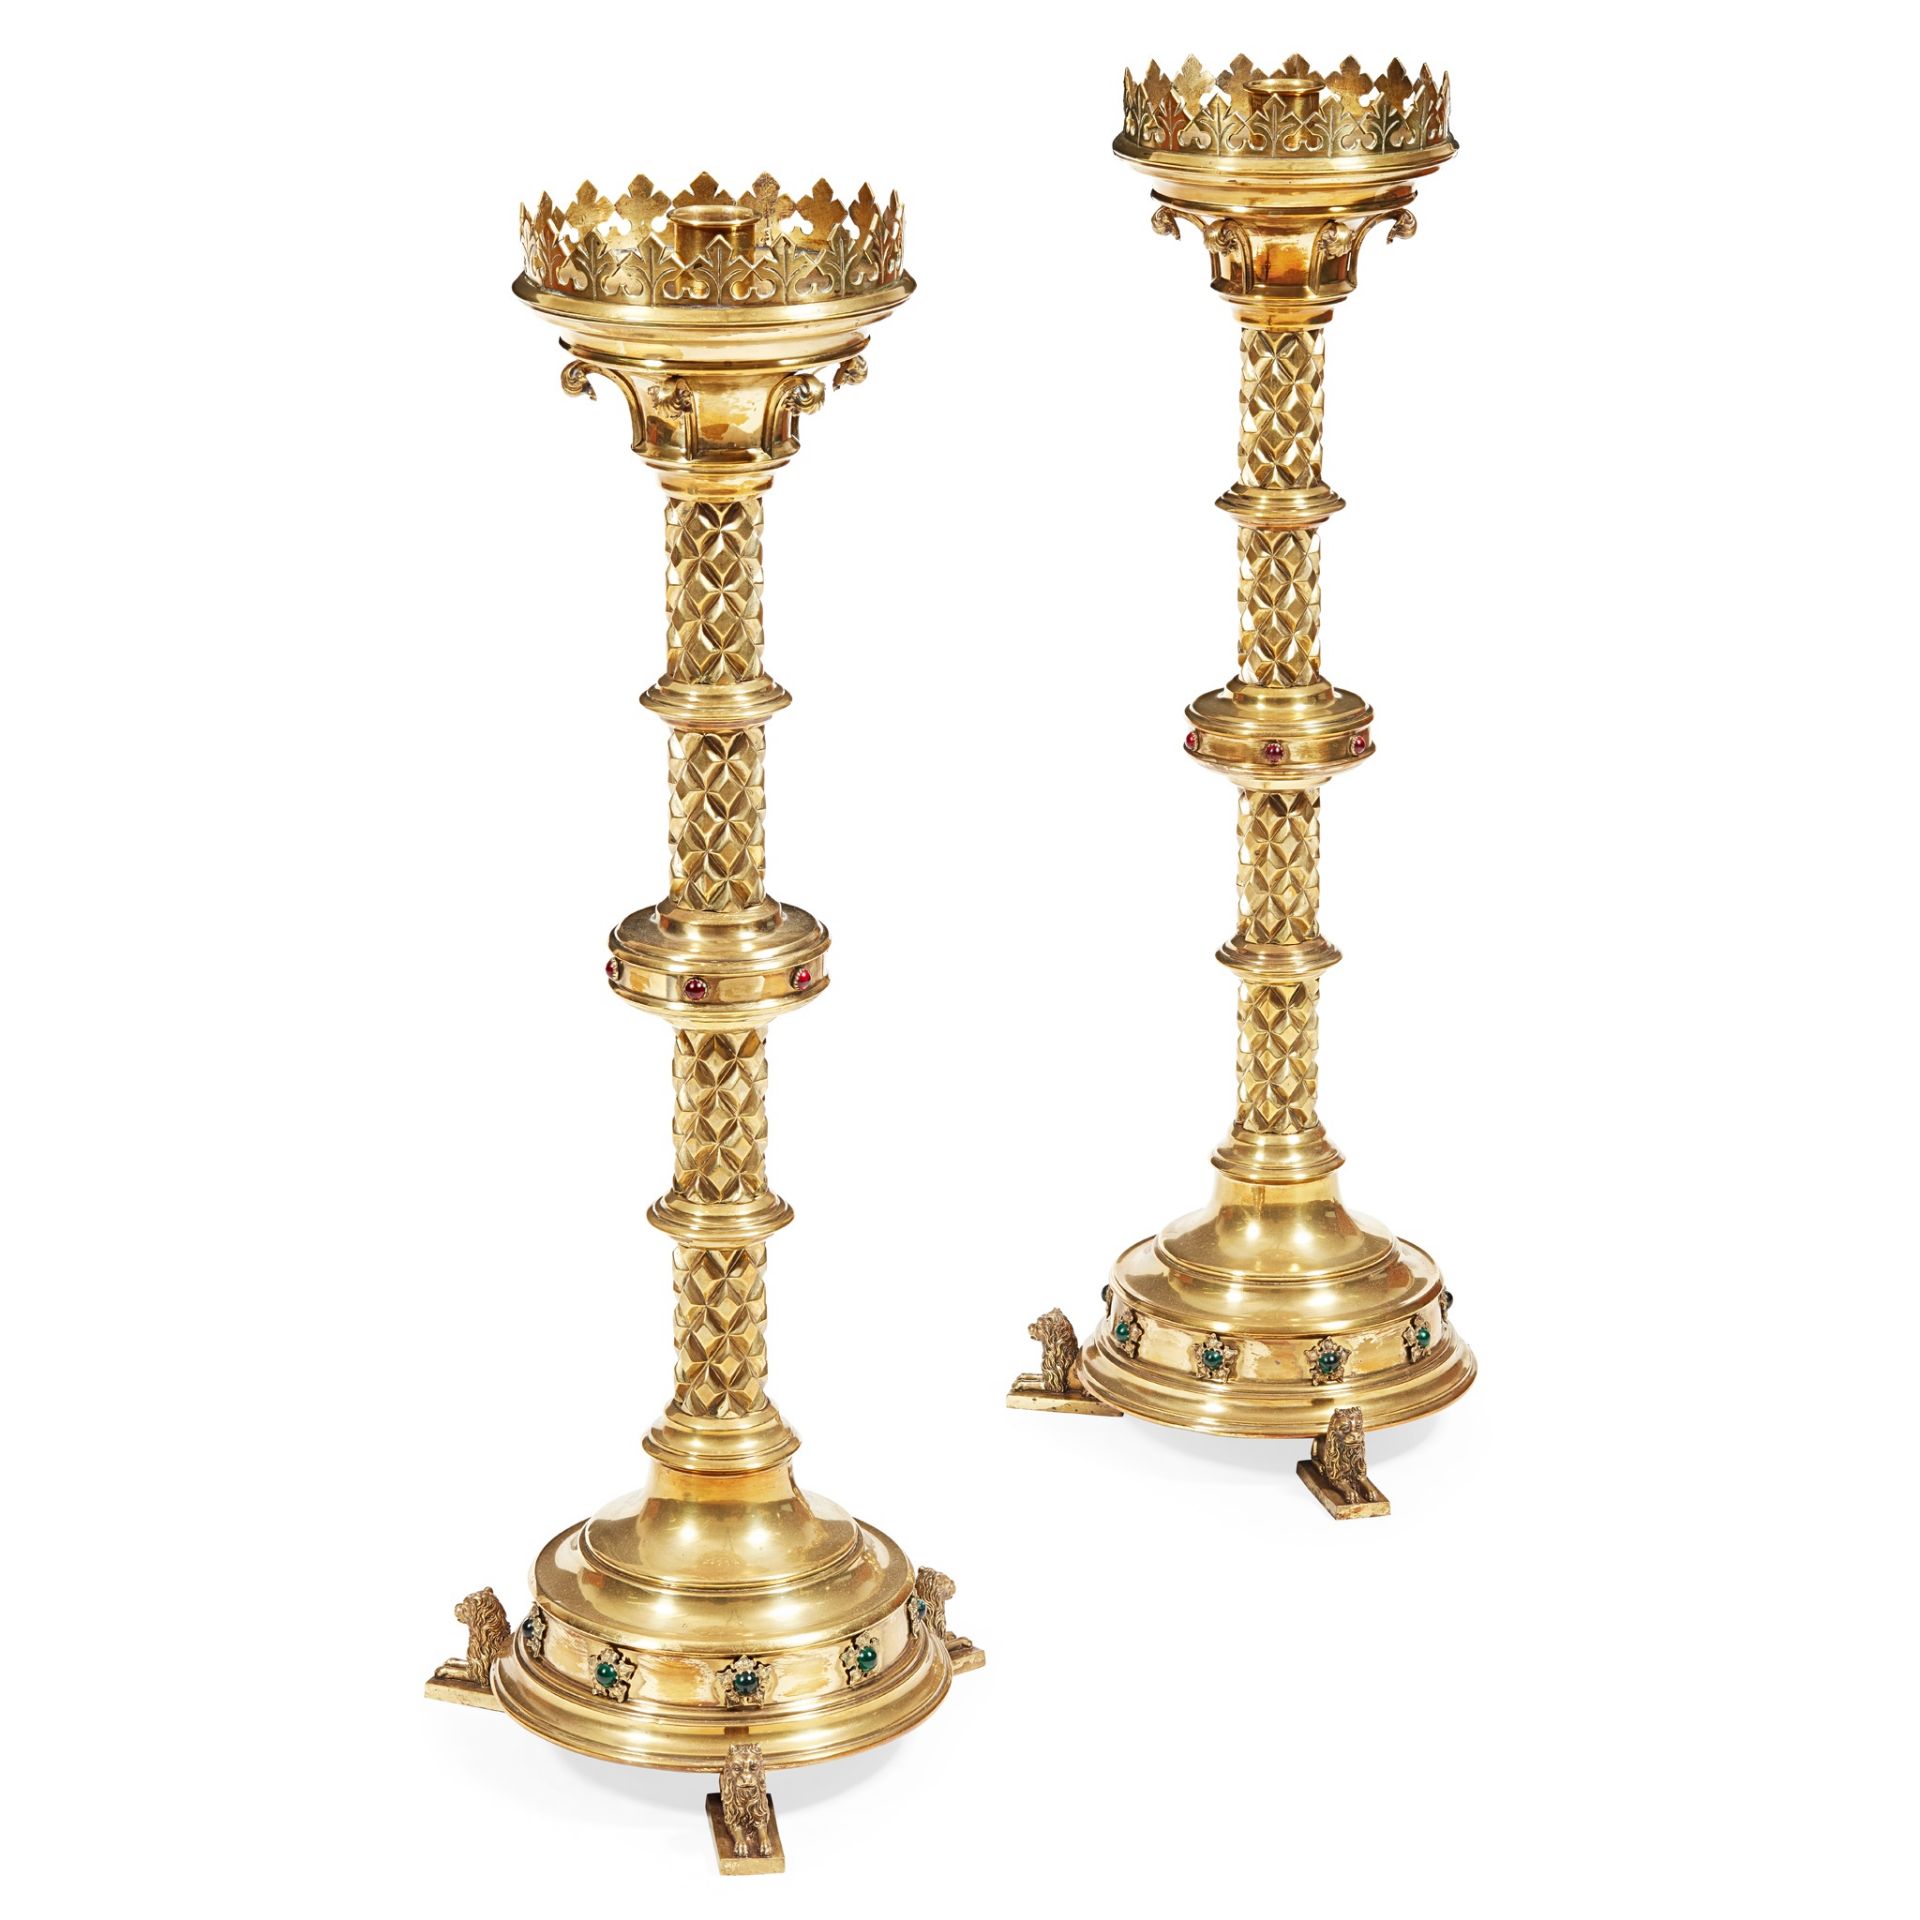 ATTRIBUTED TO HART, SON, PEARD & CO. LARGE PAIR OF GOTHIC REVIVAL CANDLESTICKS, CIRCA 1880